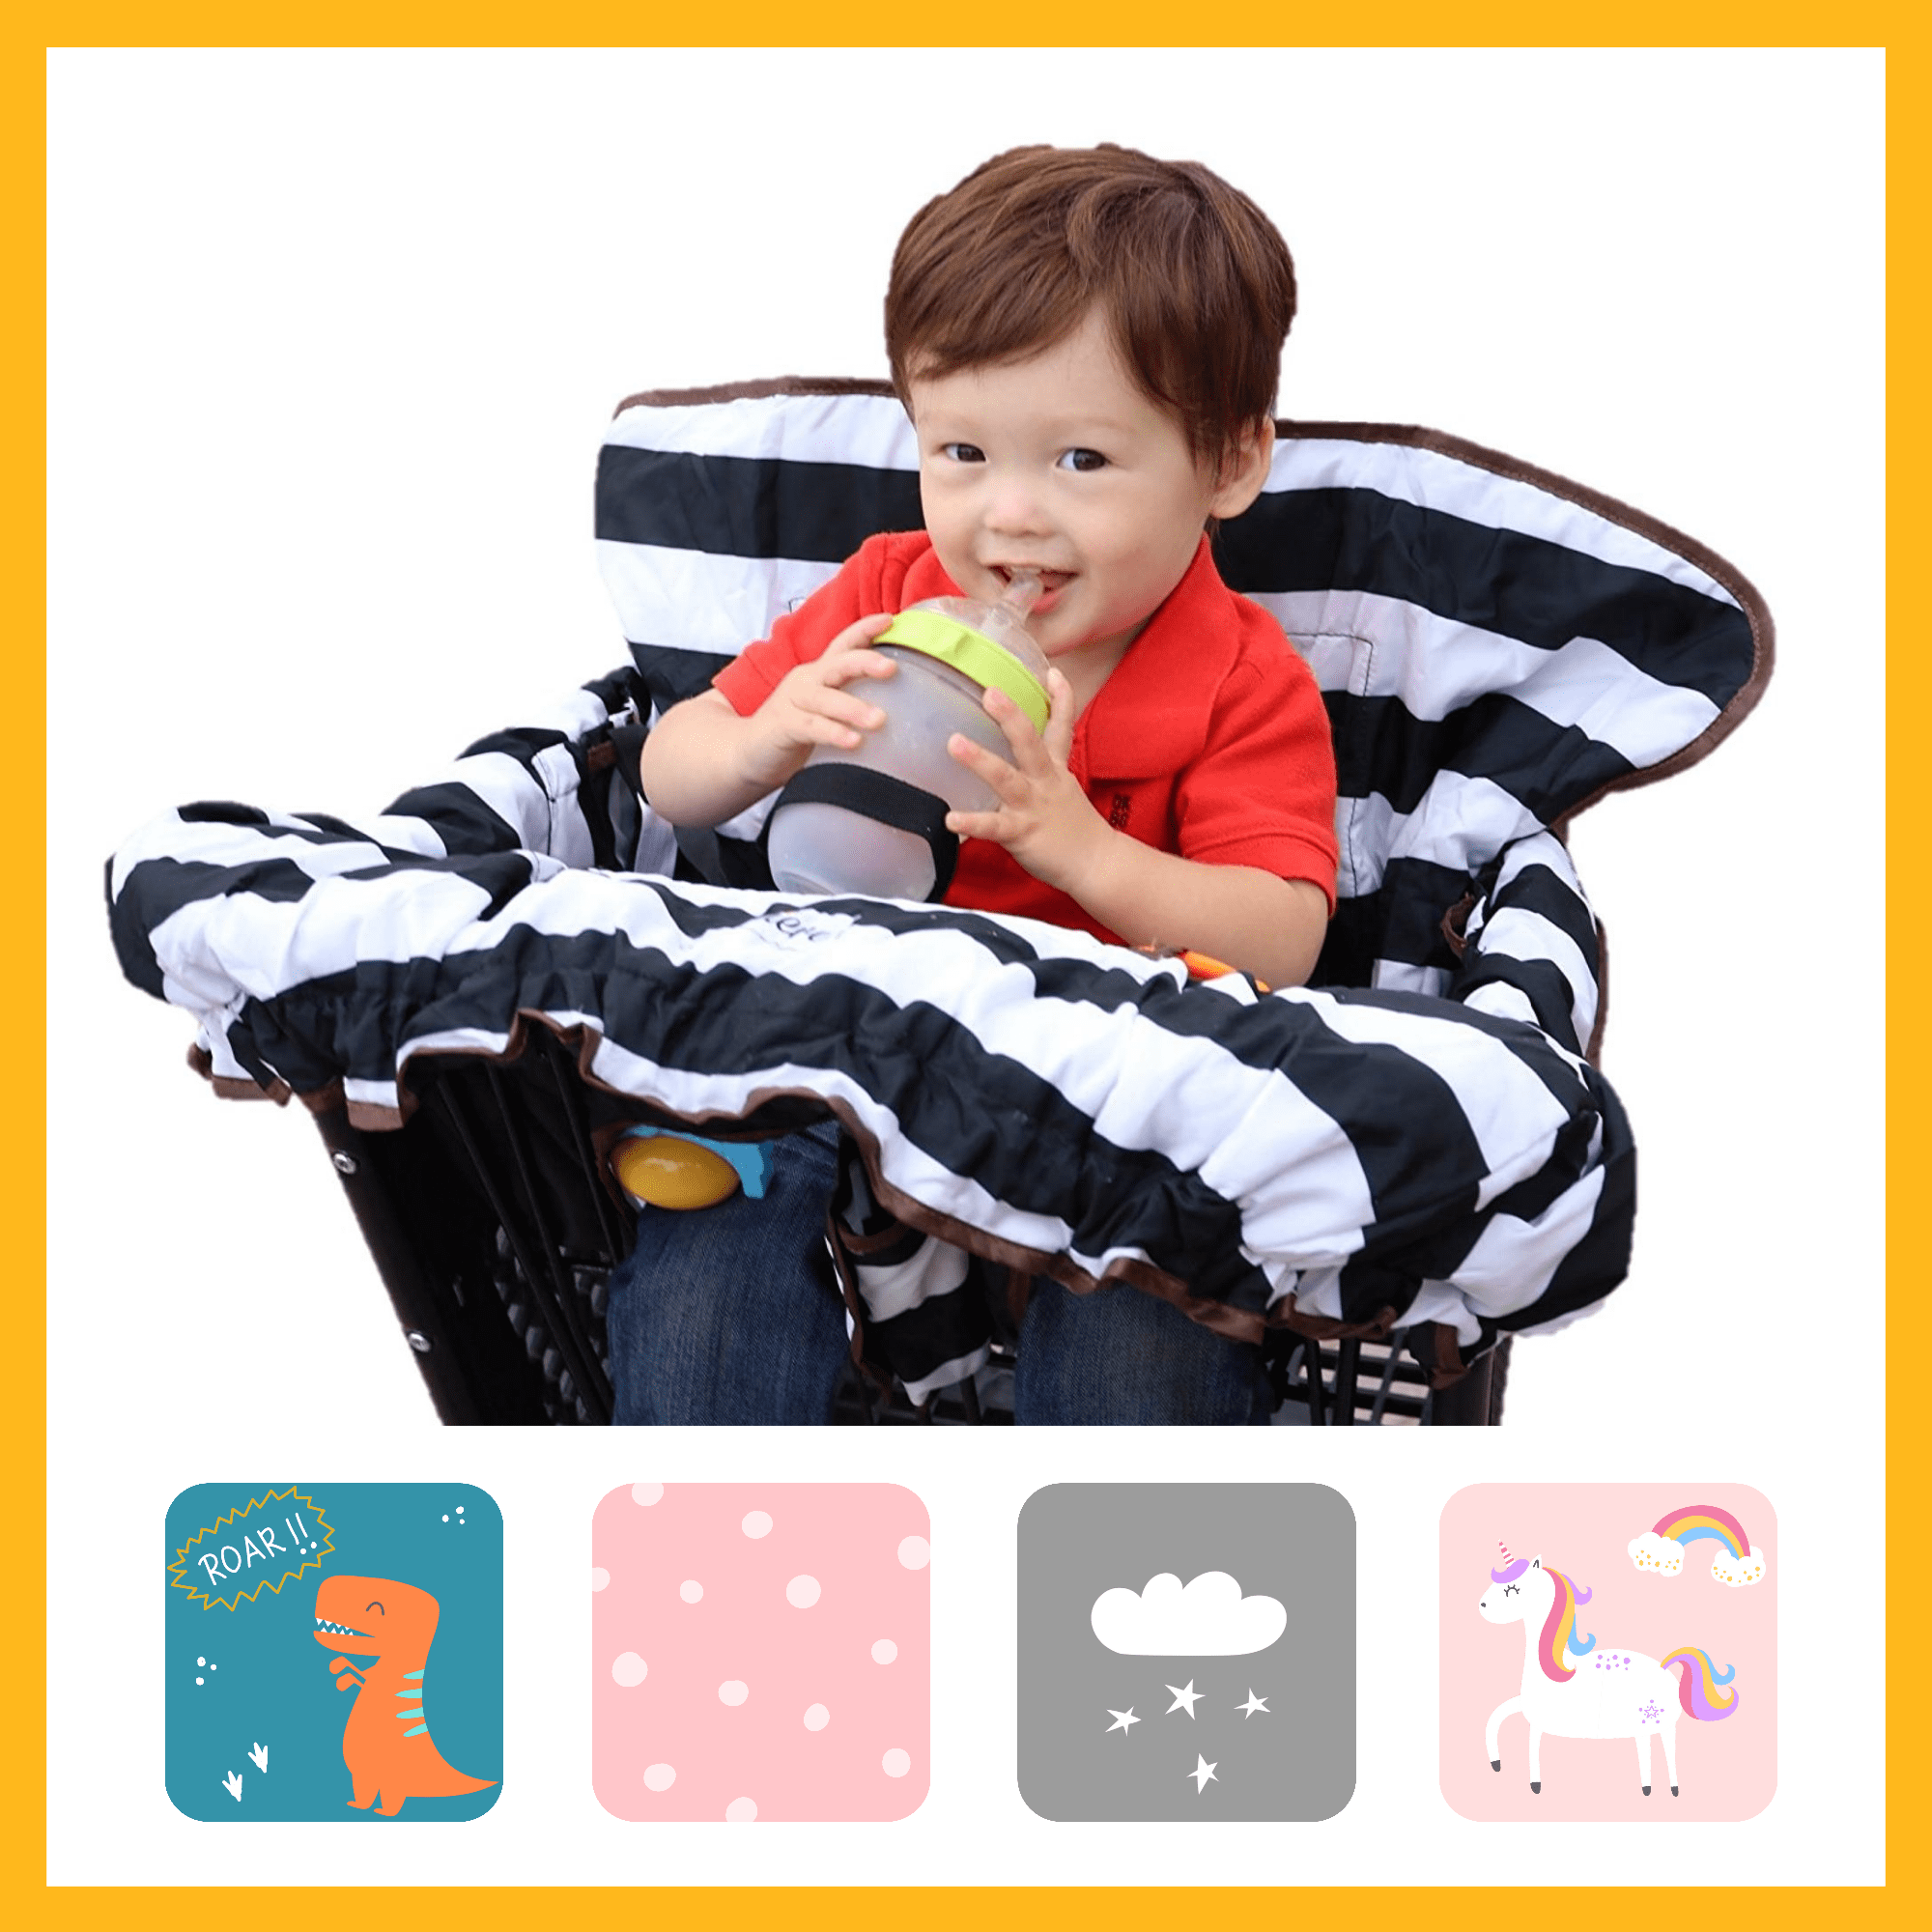 Per 2-in-1 Shopping Cart Cover Polka Dot High Chair Cover Protective Cushion Full Safety Harness Universal Fit Foldable and Washable for Baby Toddlers 